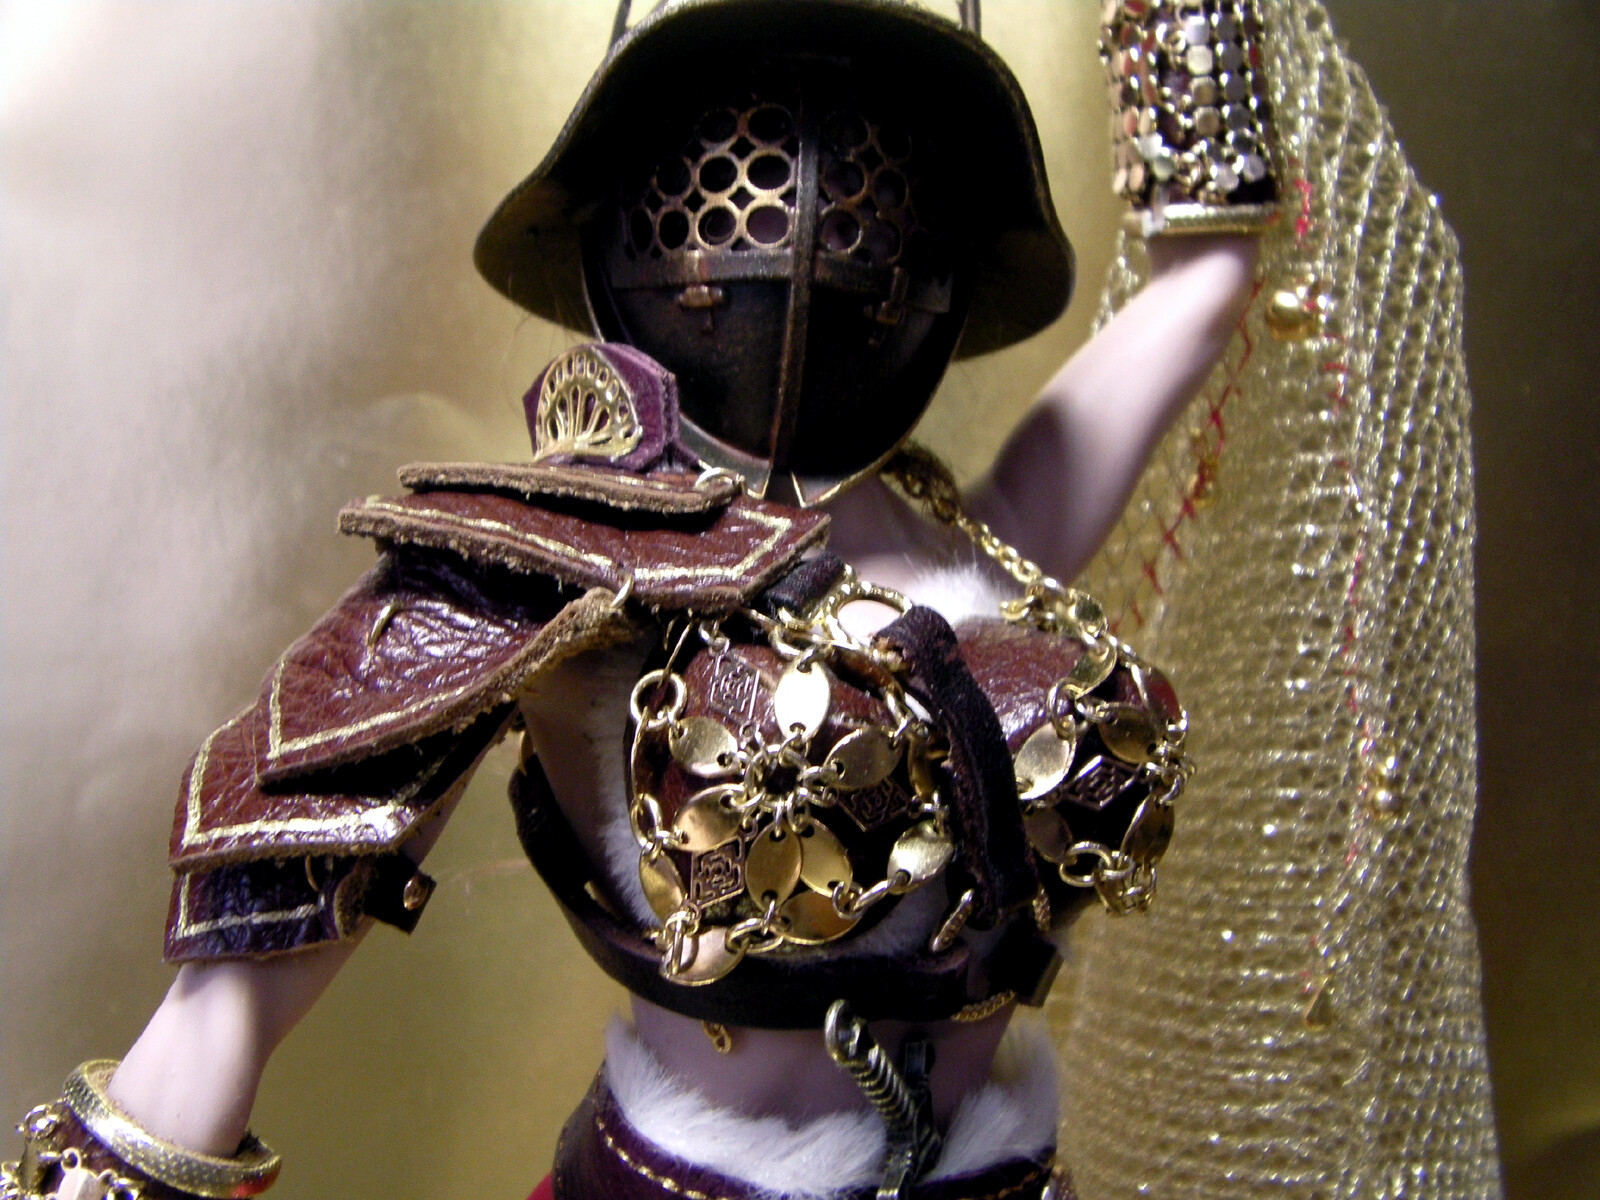 DOLL IN ARMOR - Costume for TBLeague Phicen doll.